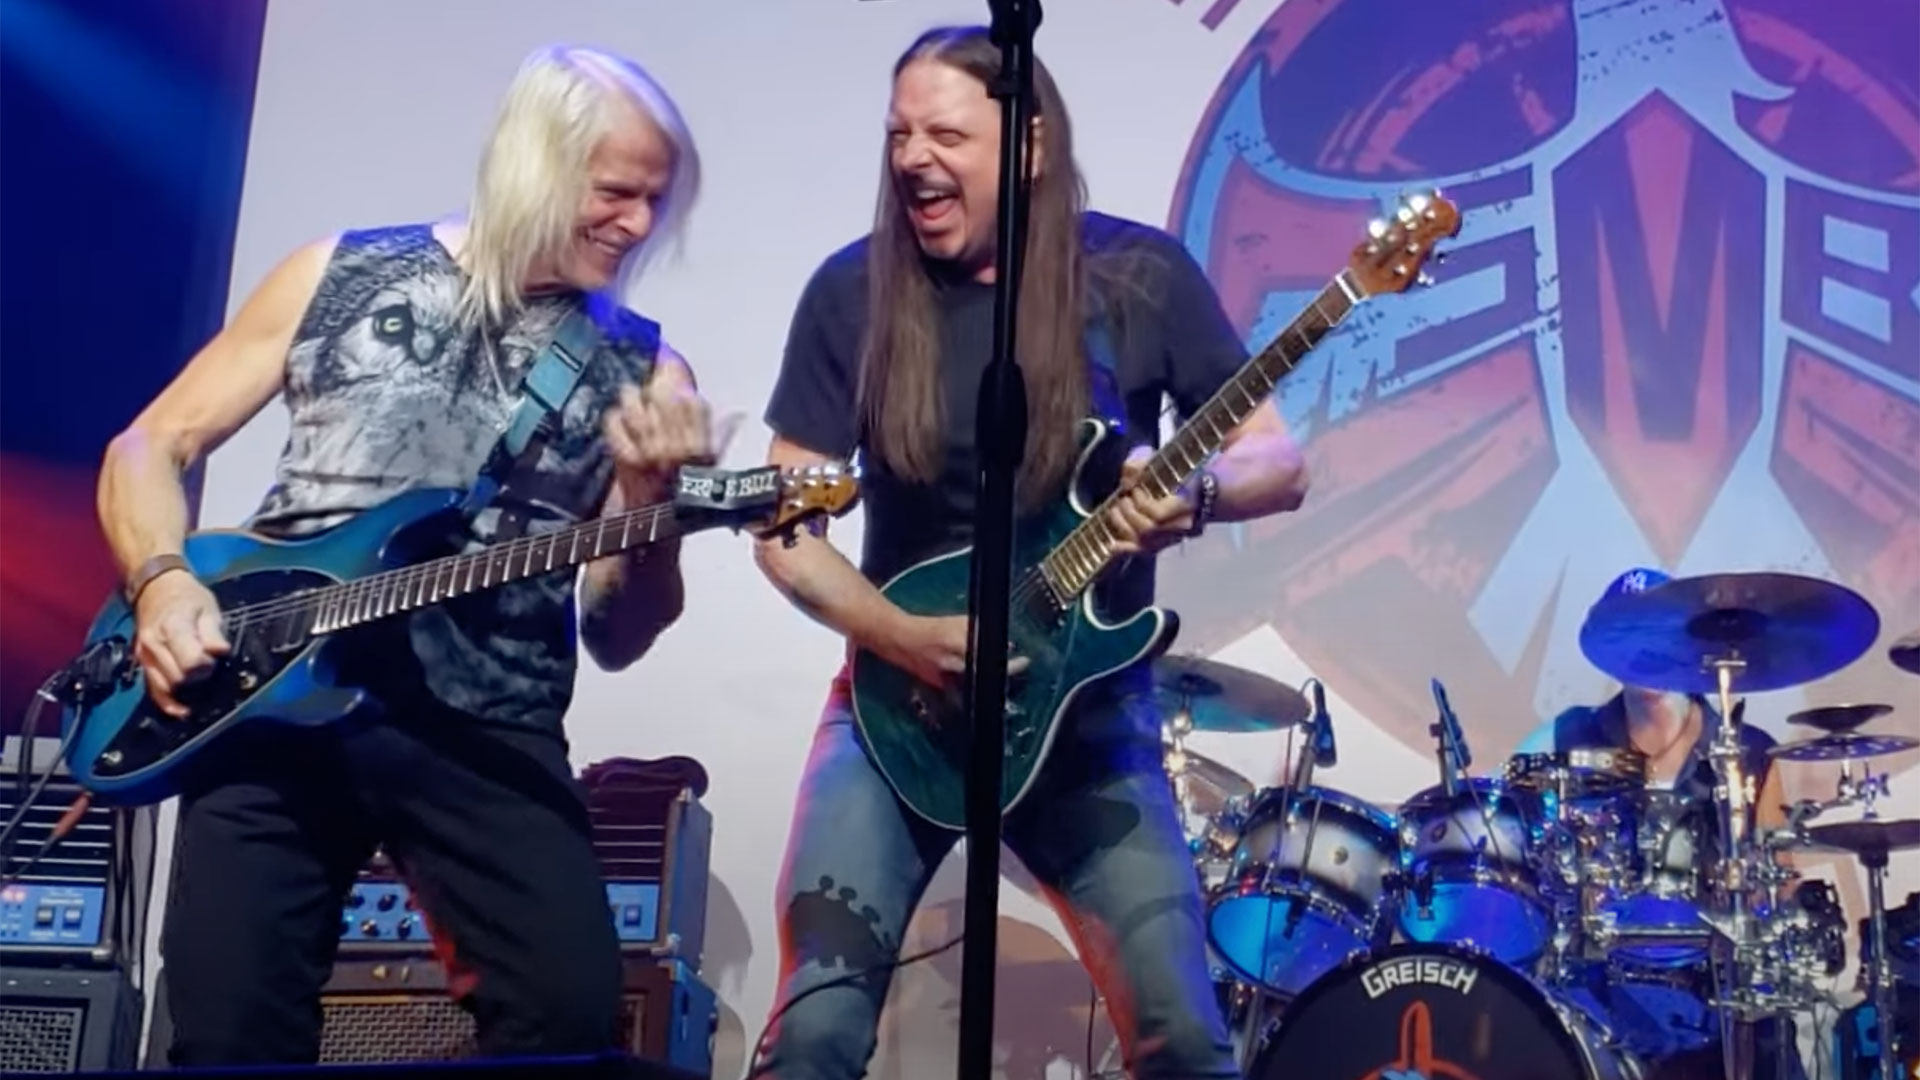 We came for Reb Beach and Steve Morse covering Crossroads. We stayed for the guitar faces thumbnail